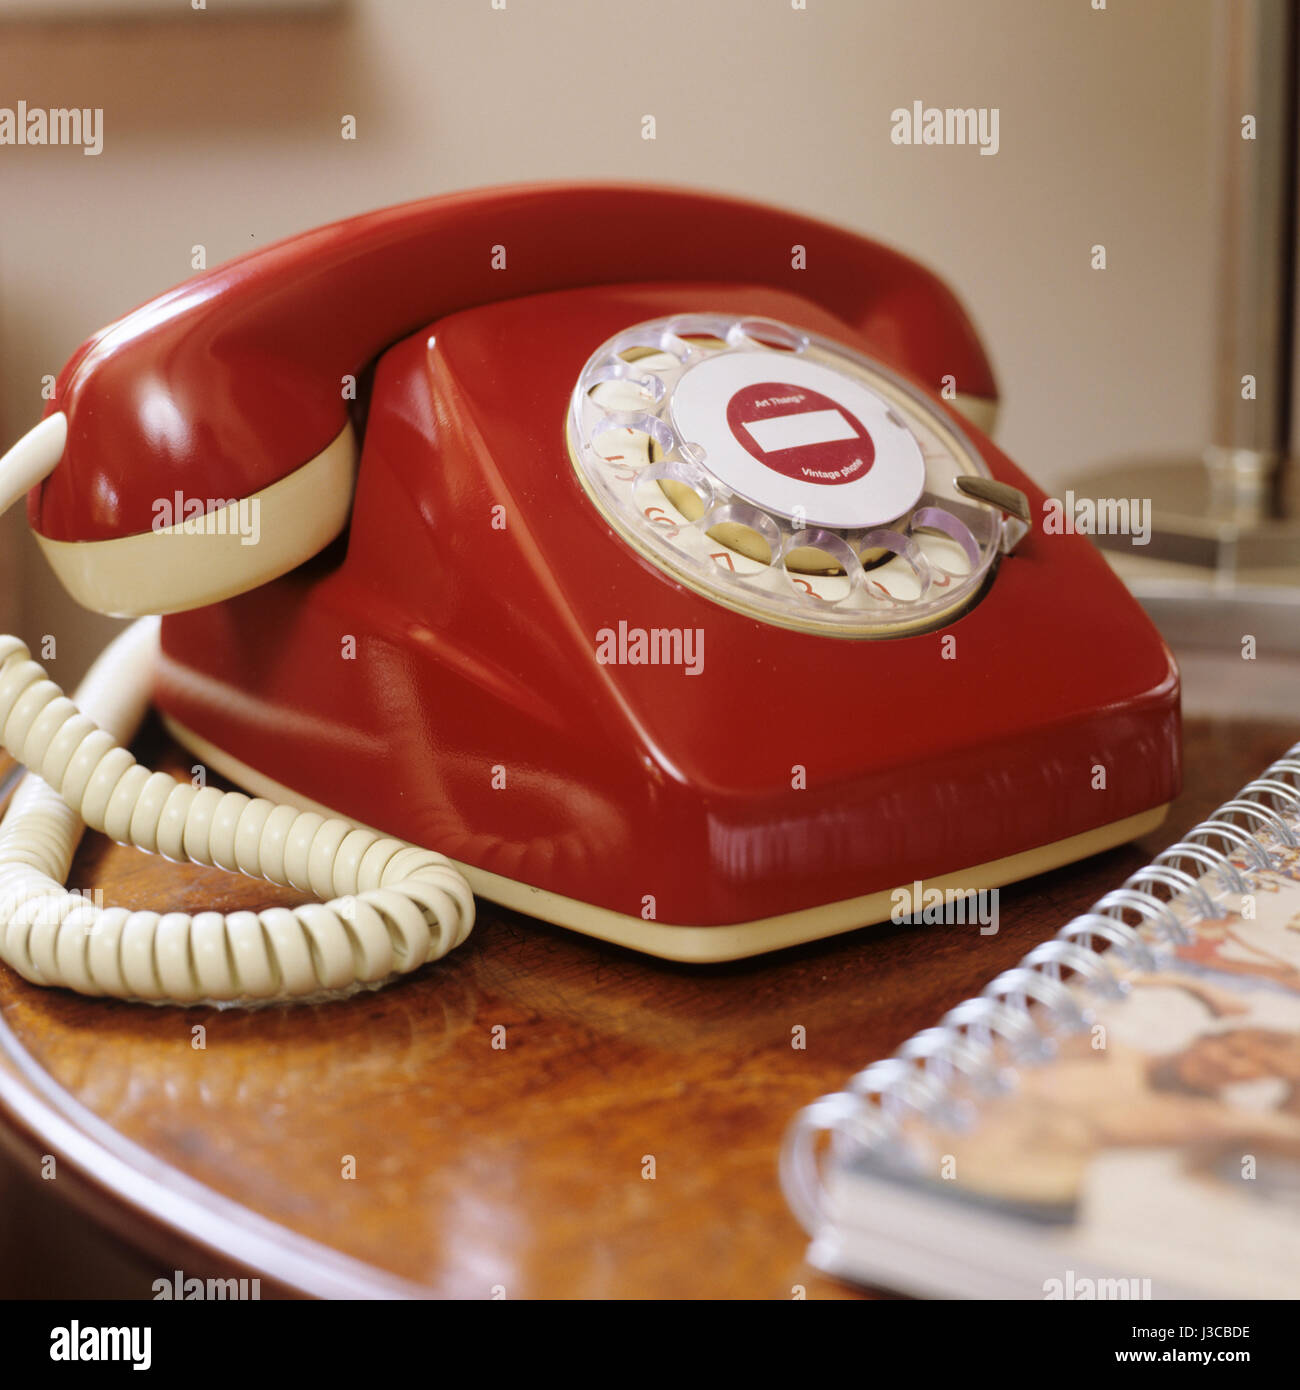 A red Art Thang vintage phone on side table with note book Stock Photo